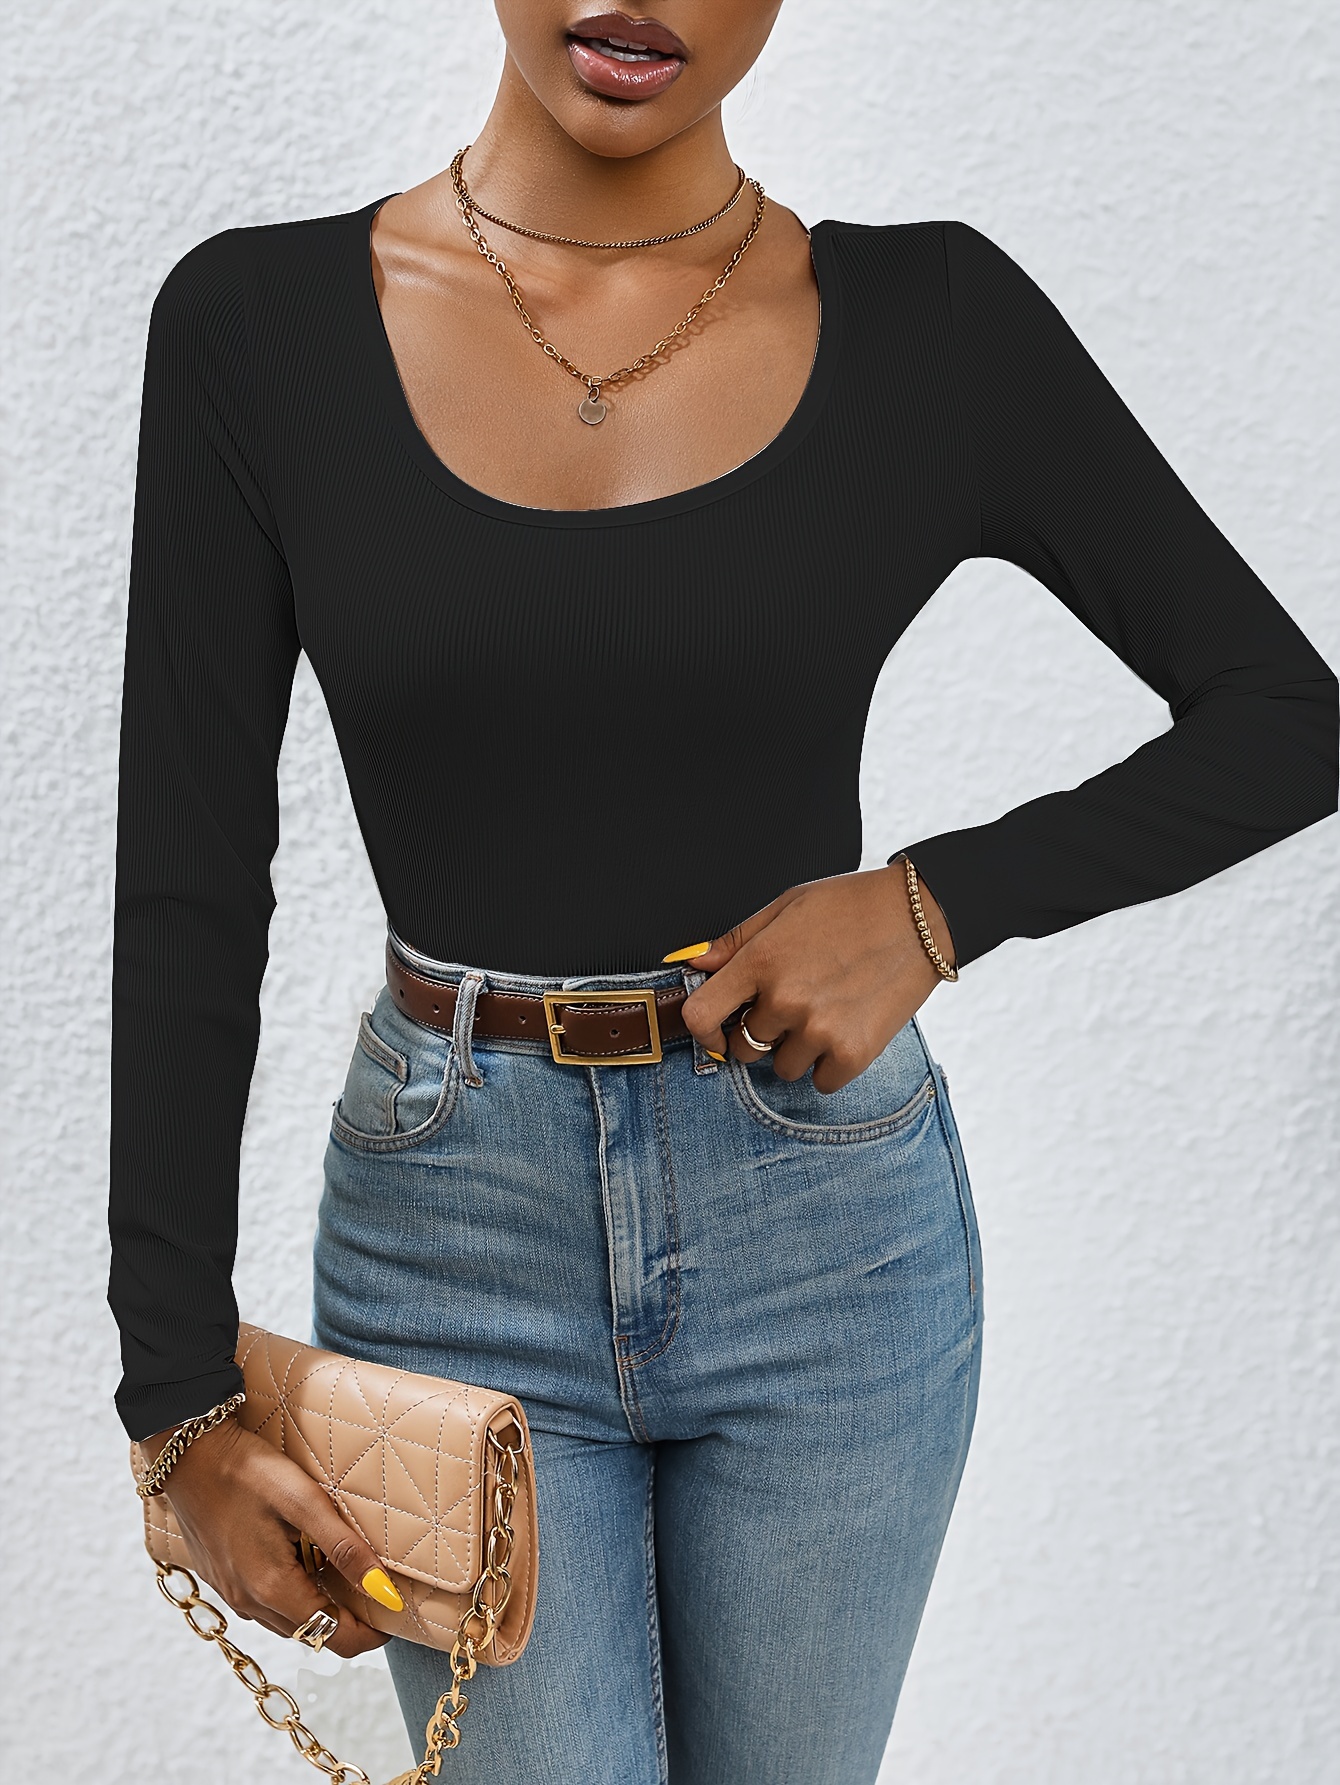 Bodysuit Tops for Women with Sleeves Square Neck Stretchy Basic